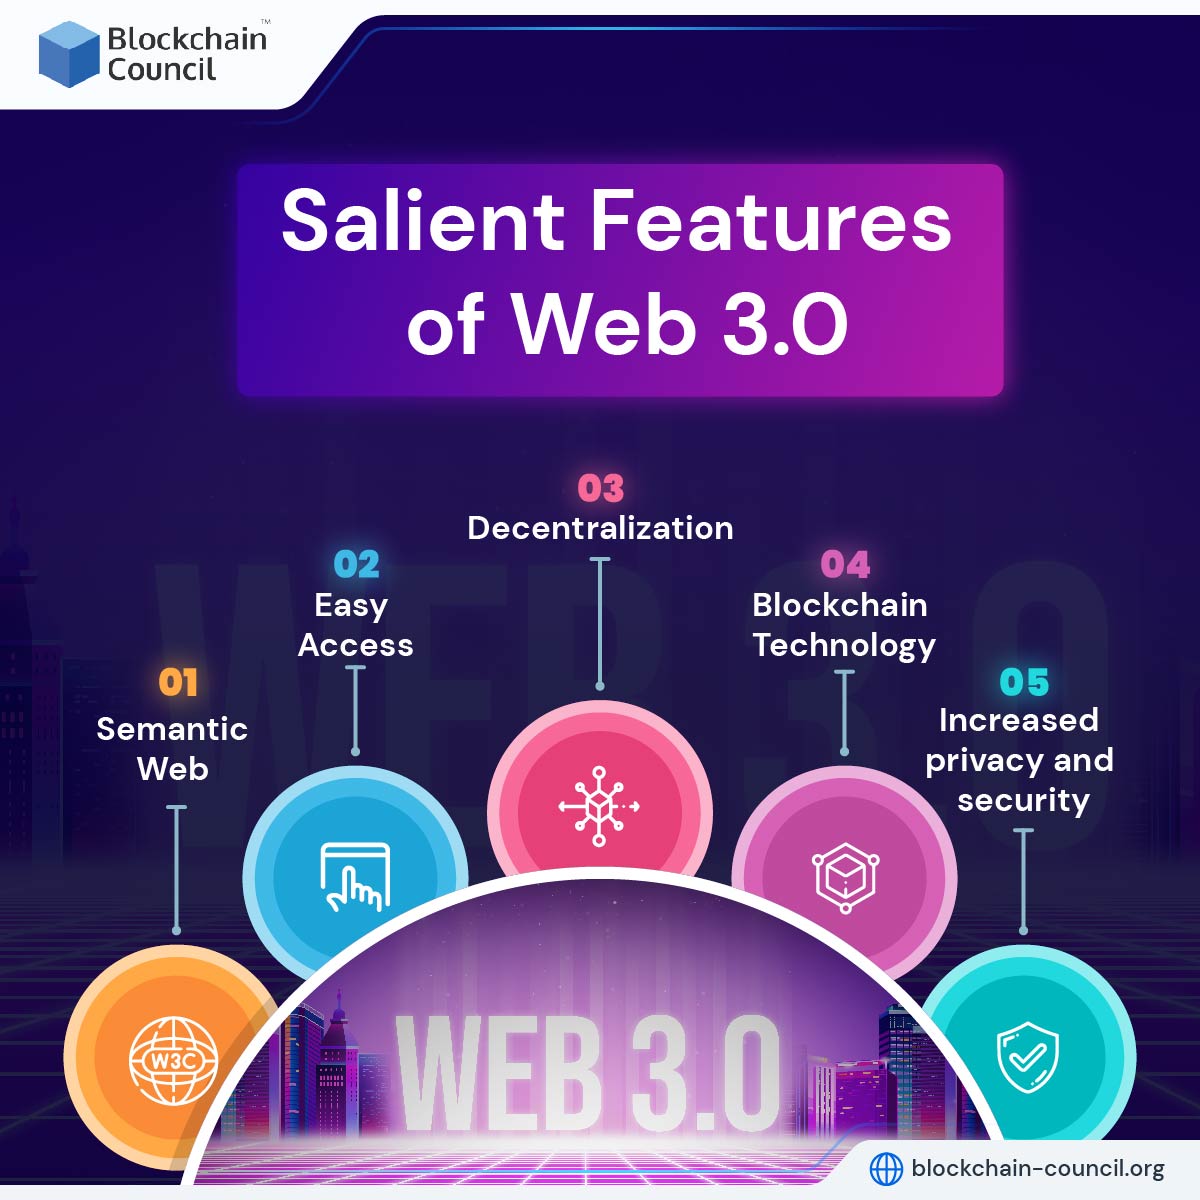 Salient Features of Web 3.0